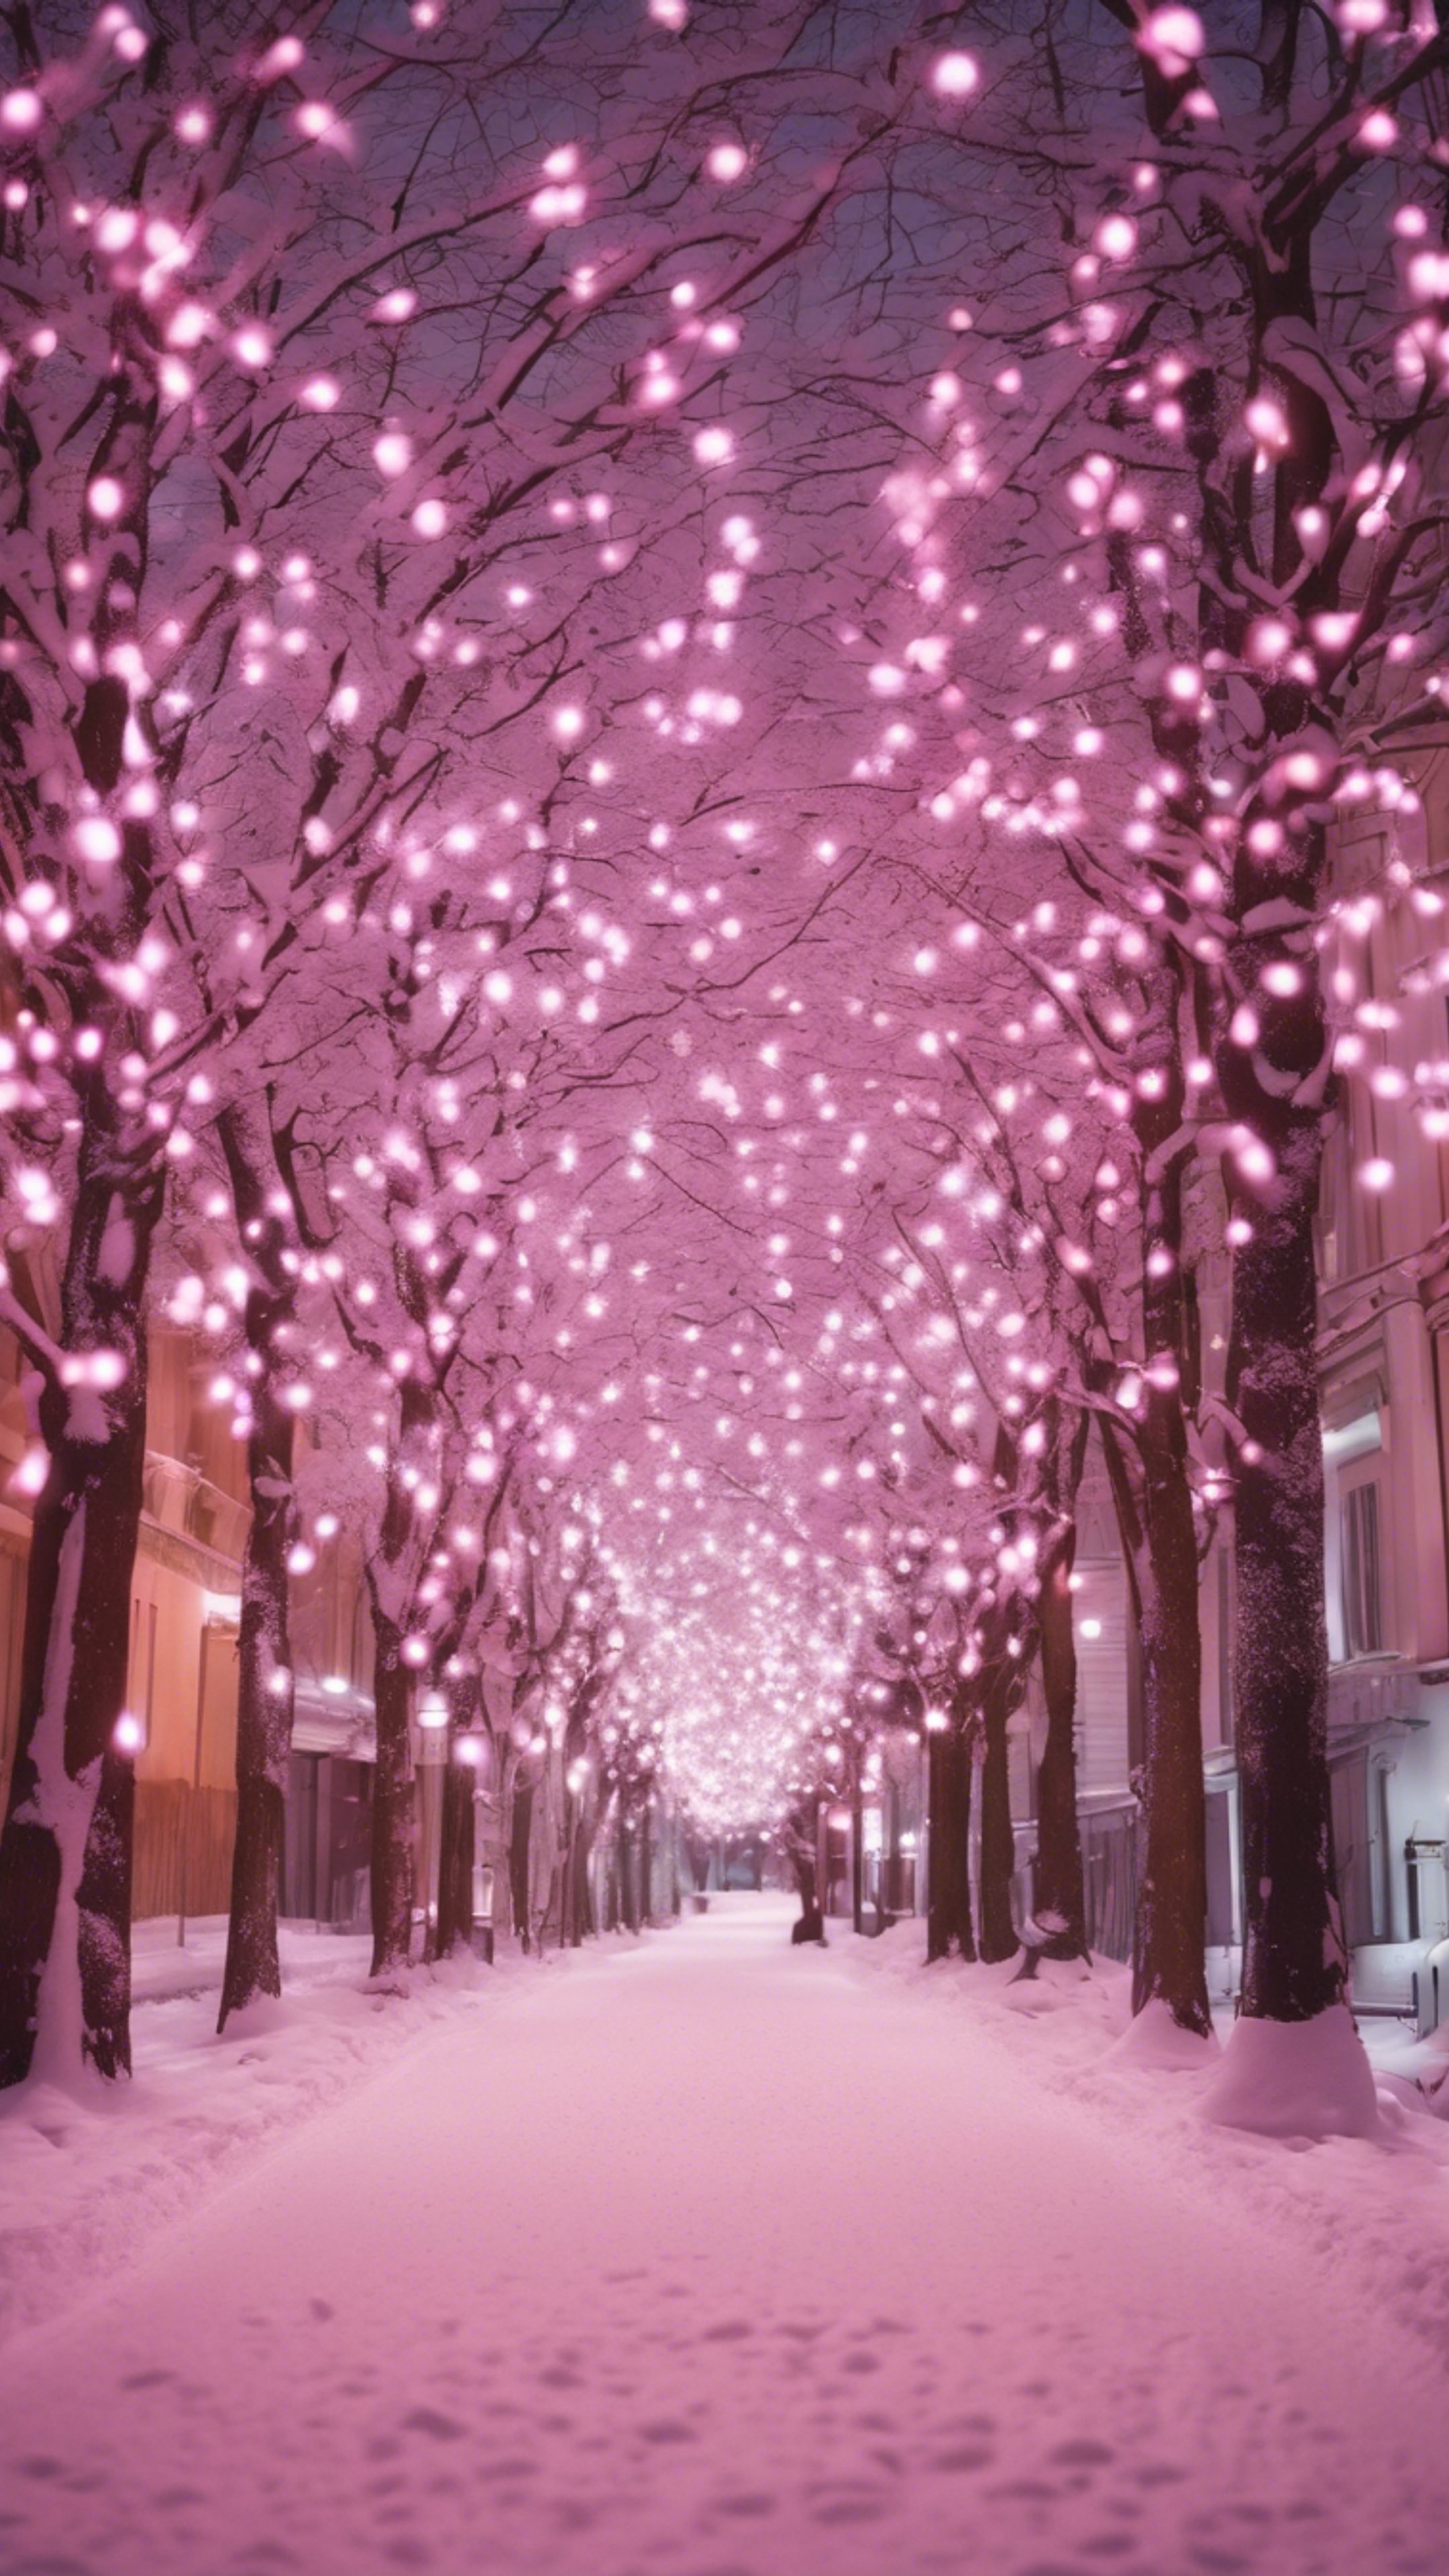 A snow-covered street illuminated by twinkling pink Christmas lights. Ფონი[4ec6c372f2074900819e]